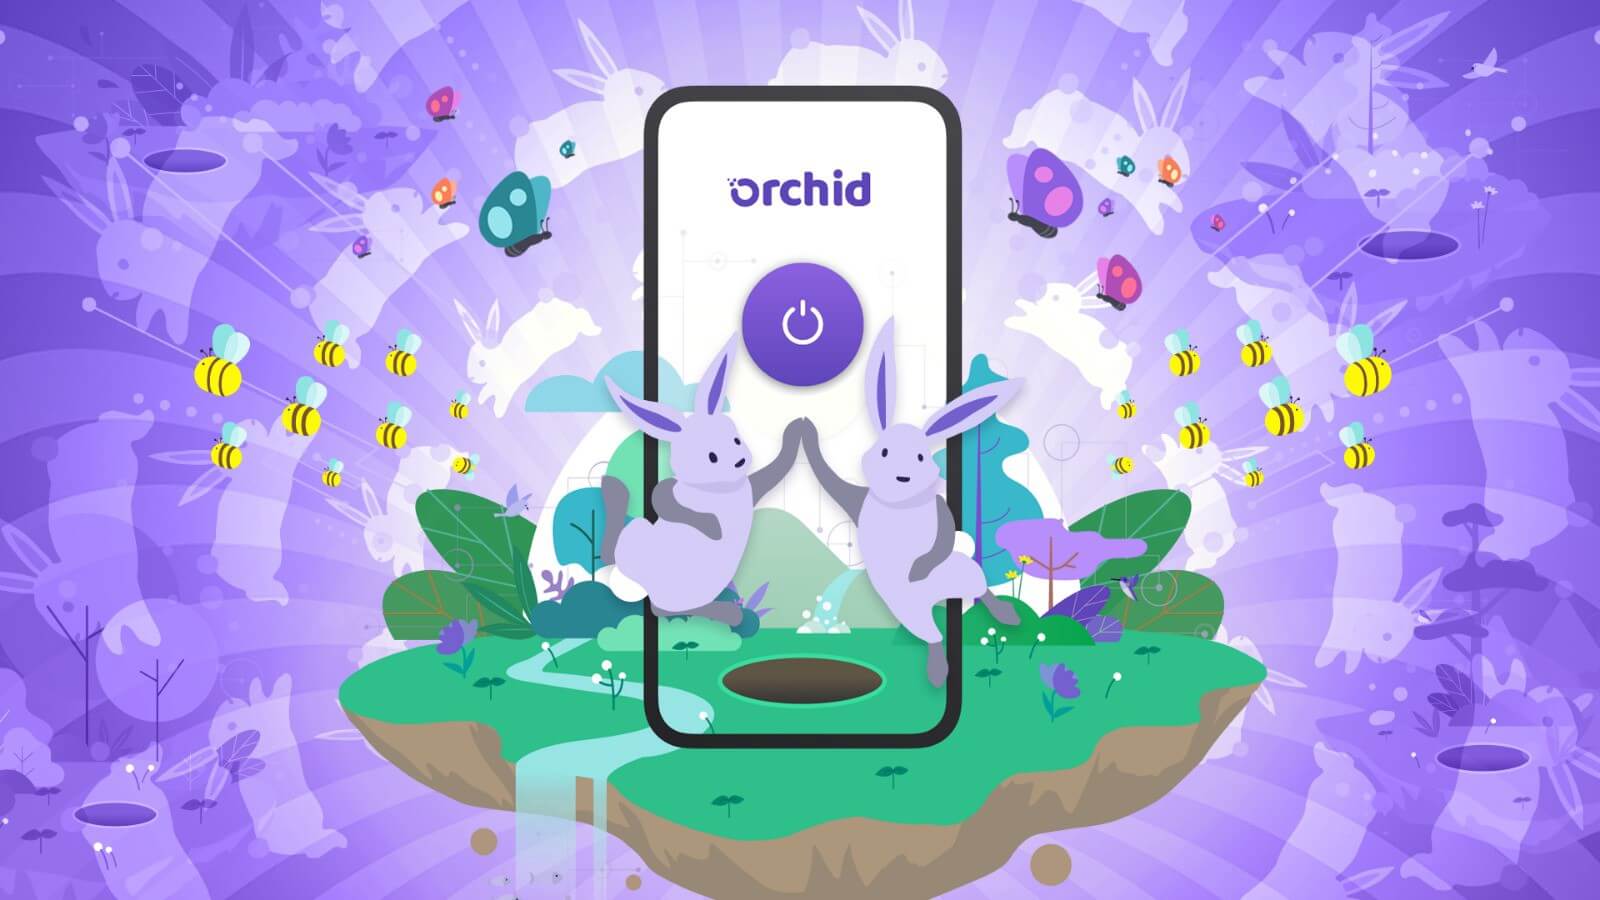 Orchid Network